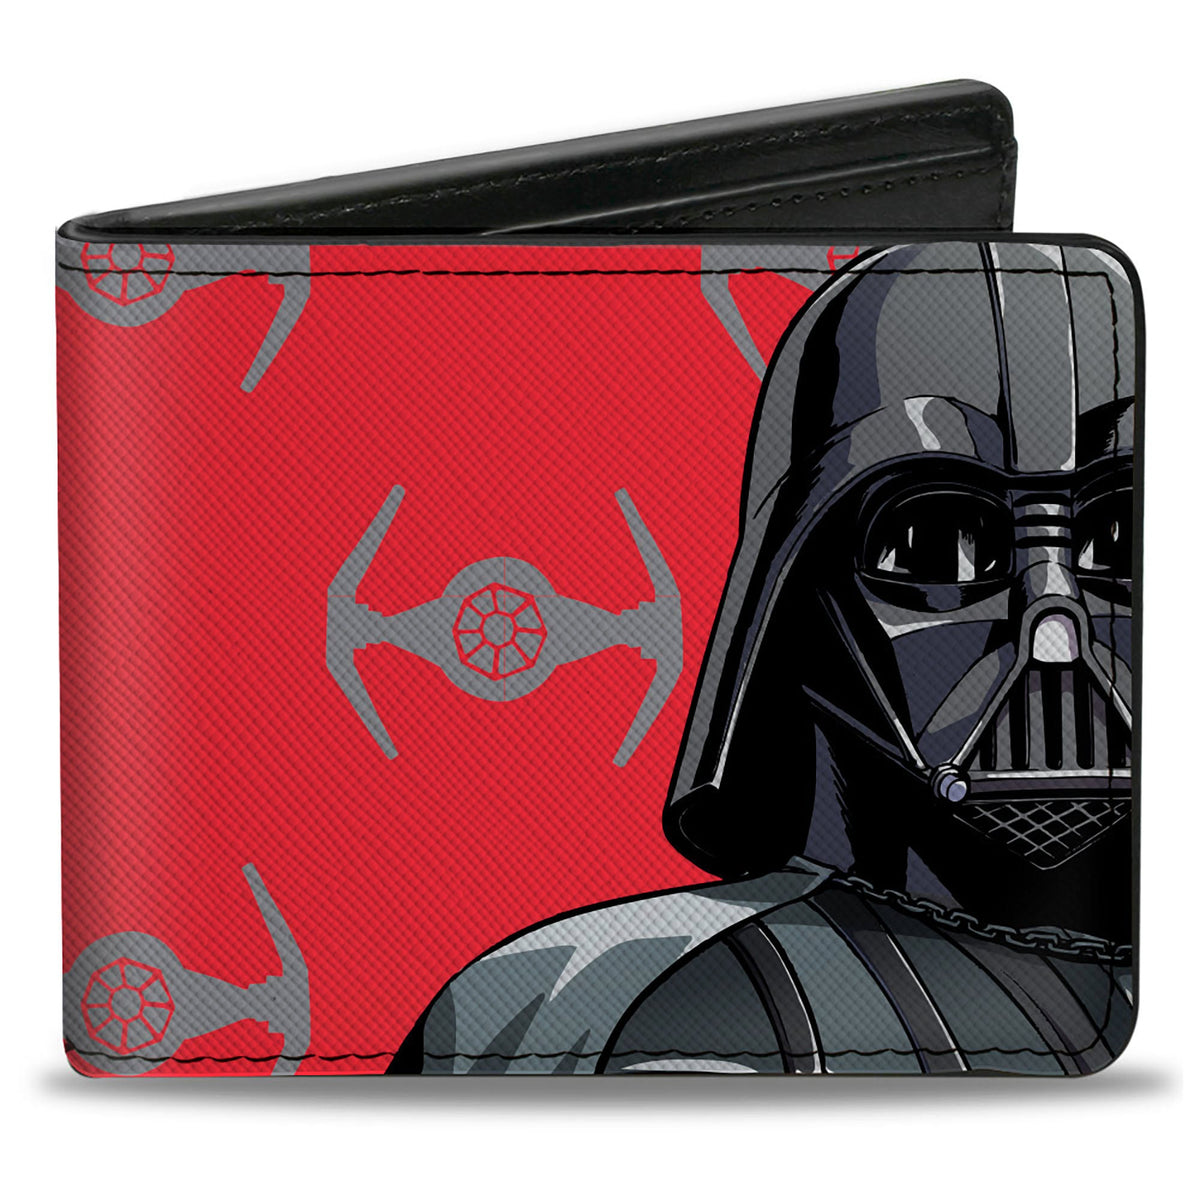 Bi-Fold Wallet - Star Wars Darth Vader Pose and TIE Fighter Icon Red/Gray